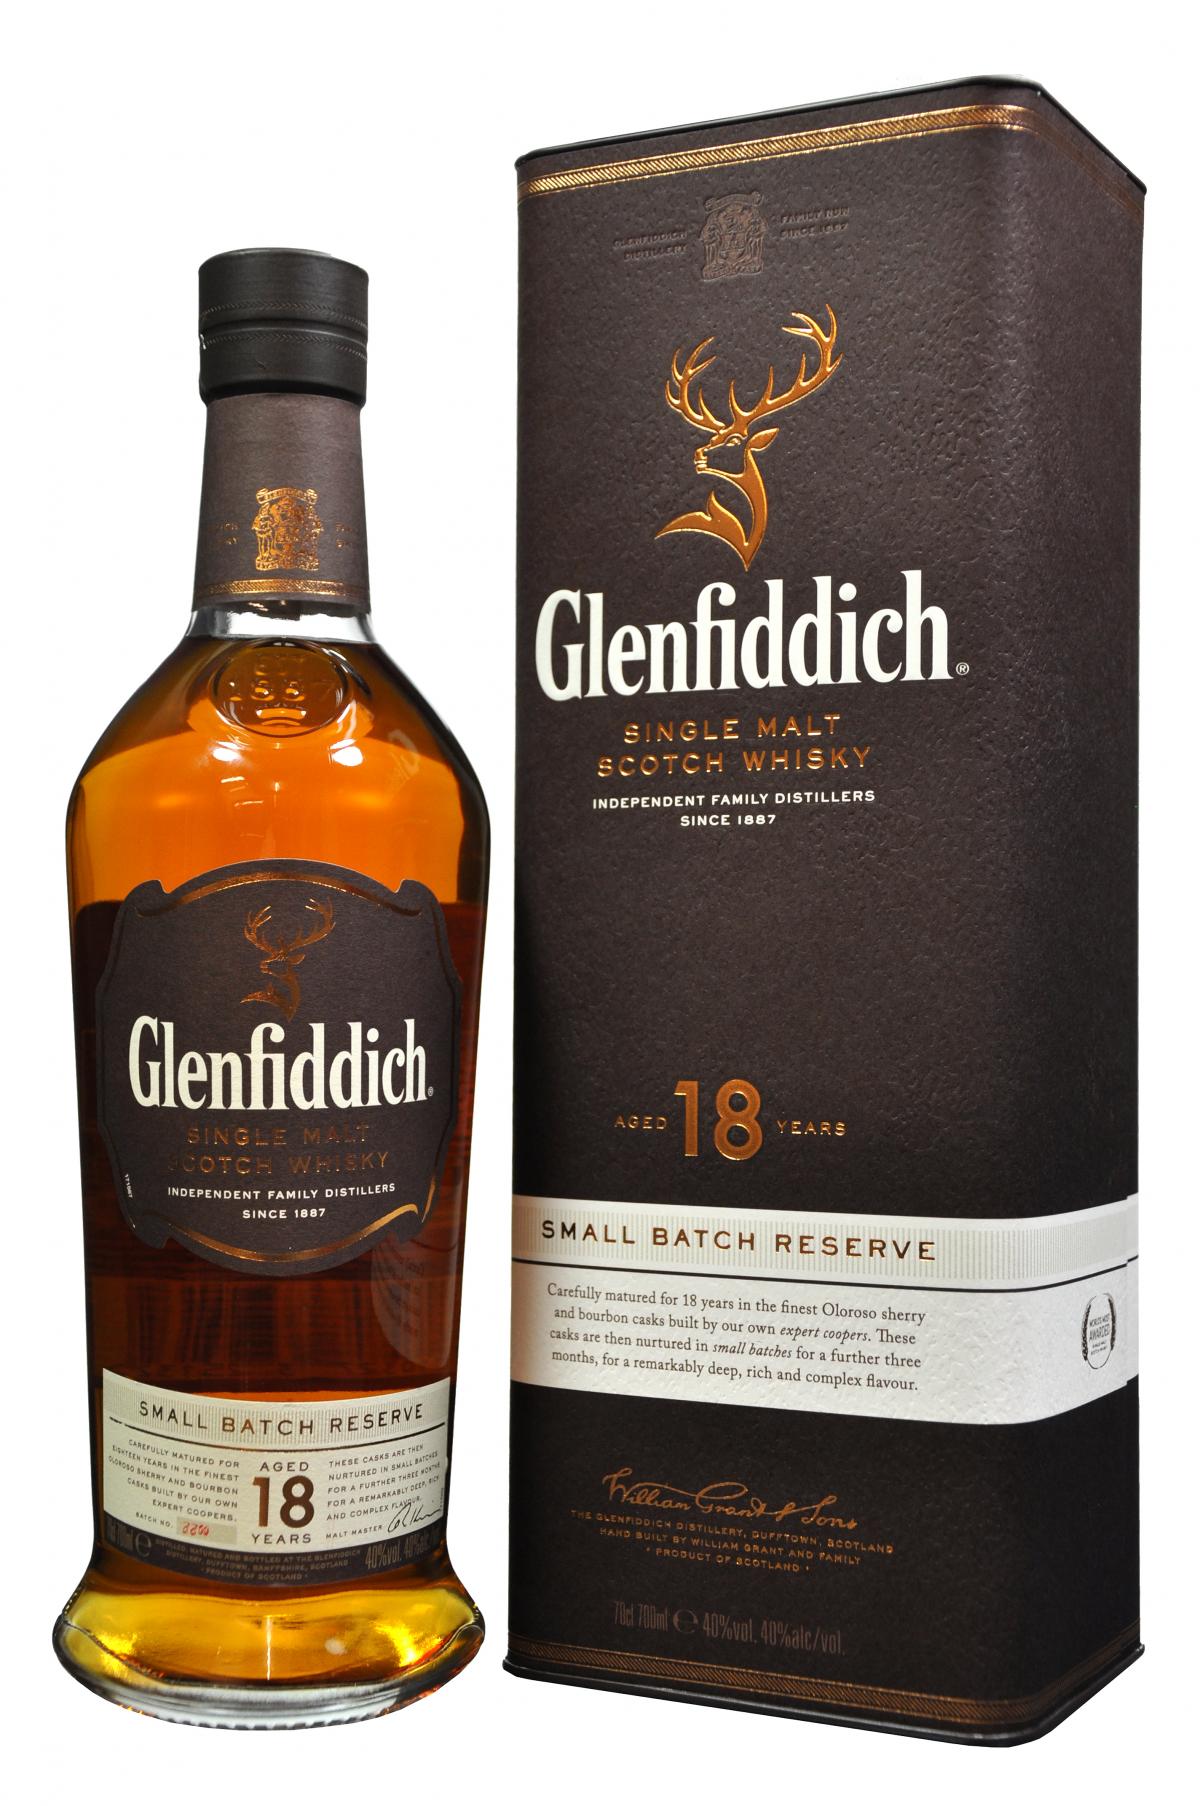 Glenfiddich 18 Year Old Small Batch Reserve